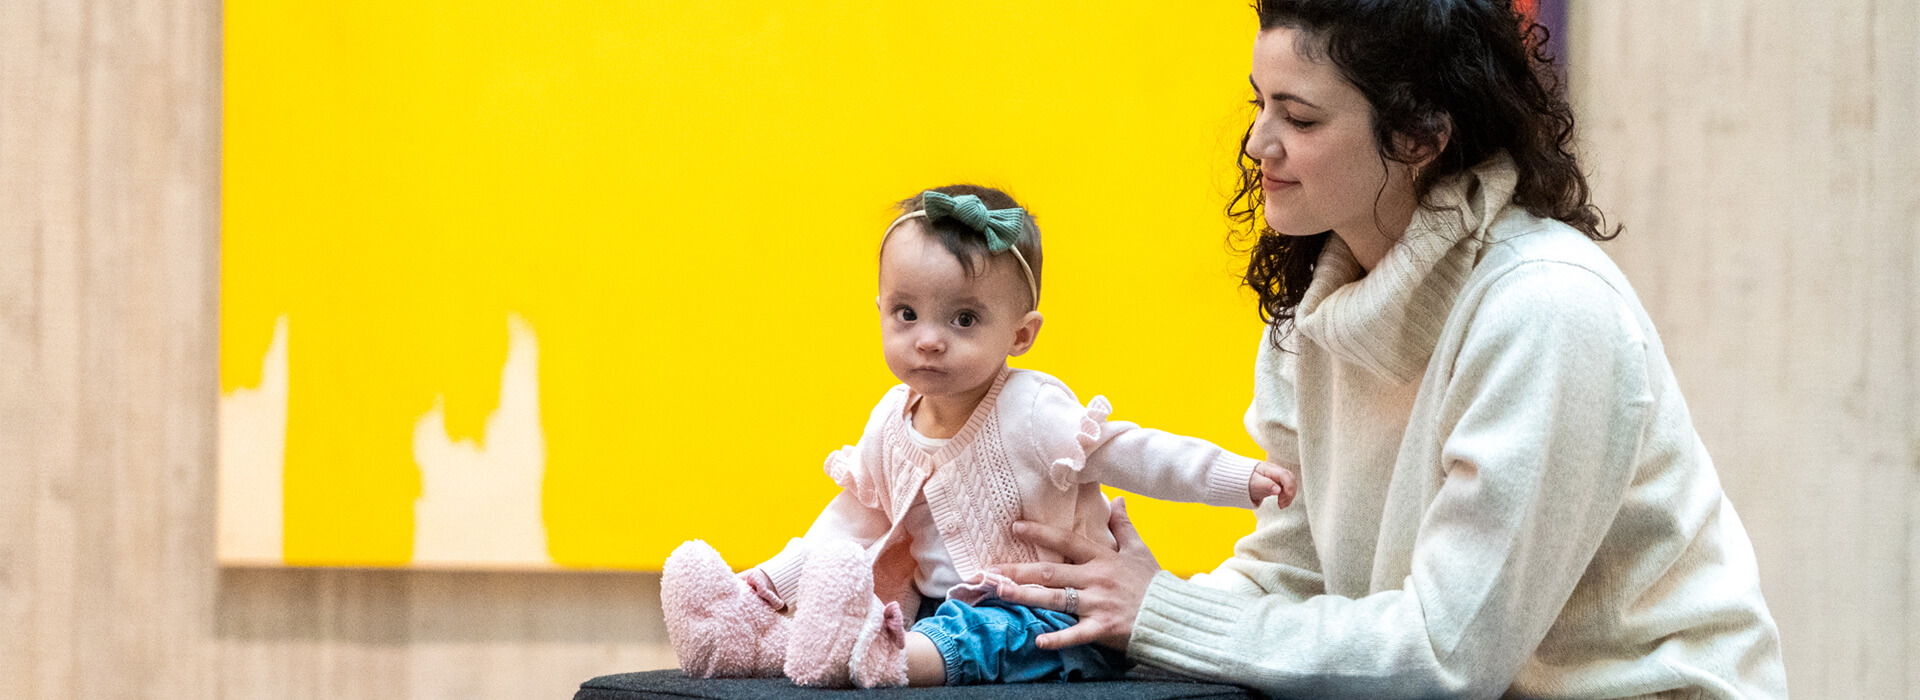 A mom kneels next to her baby girl who is sitting on a cushion in front of an abstract yellow painting